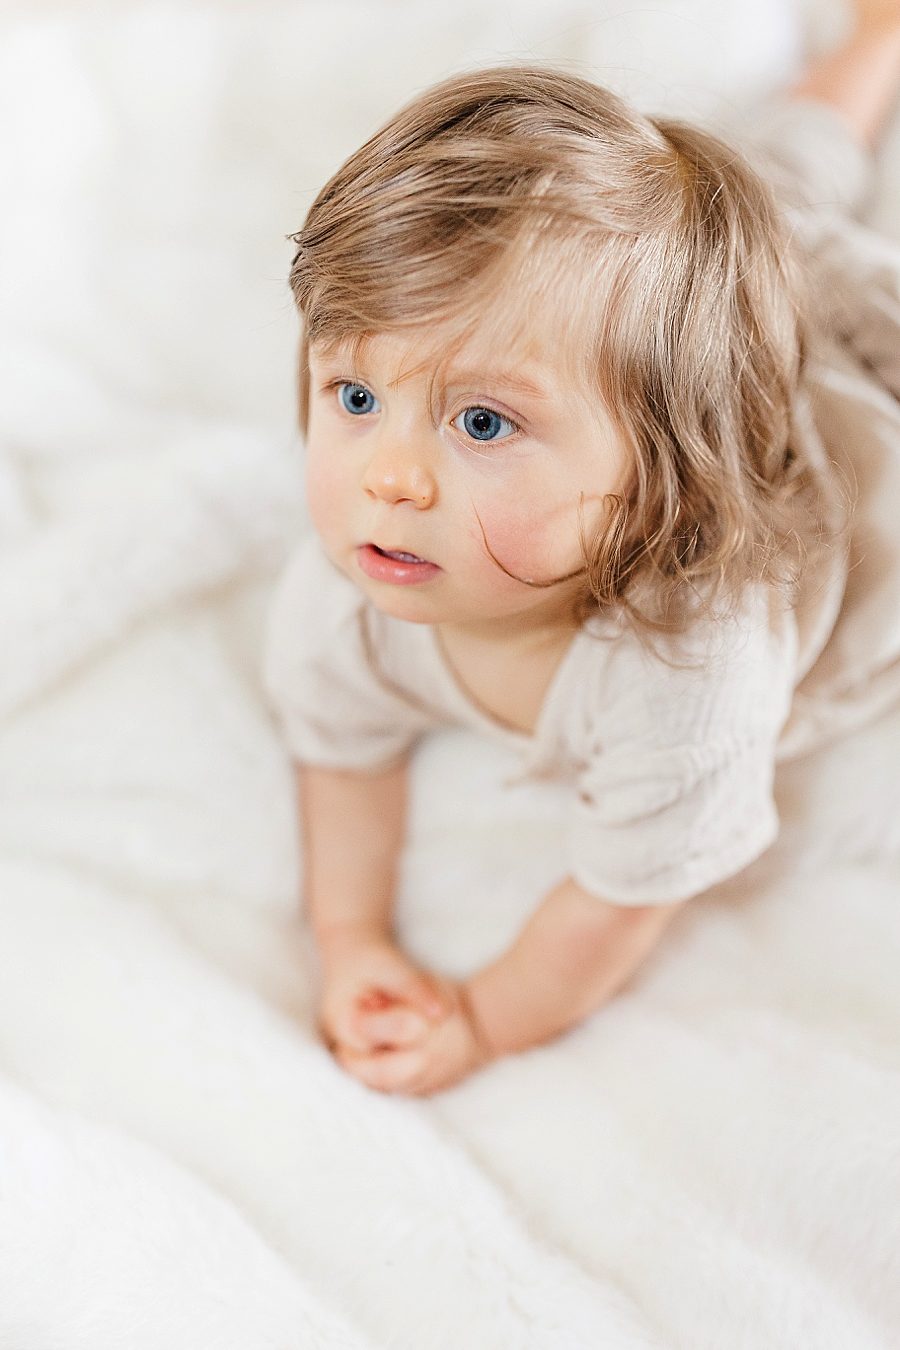 Baby on the bed 12 month lifestyle session